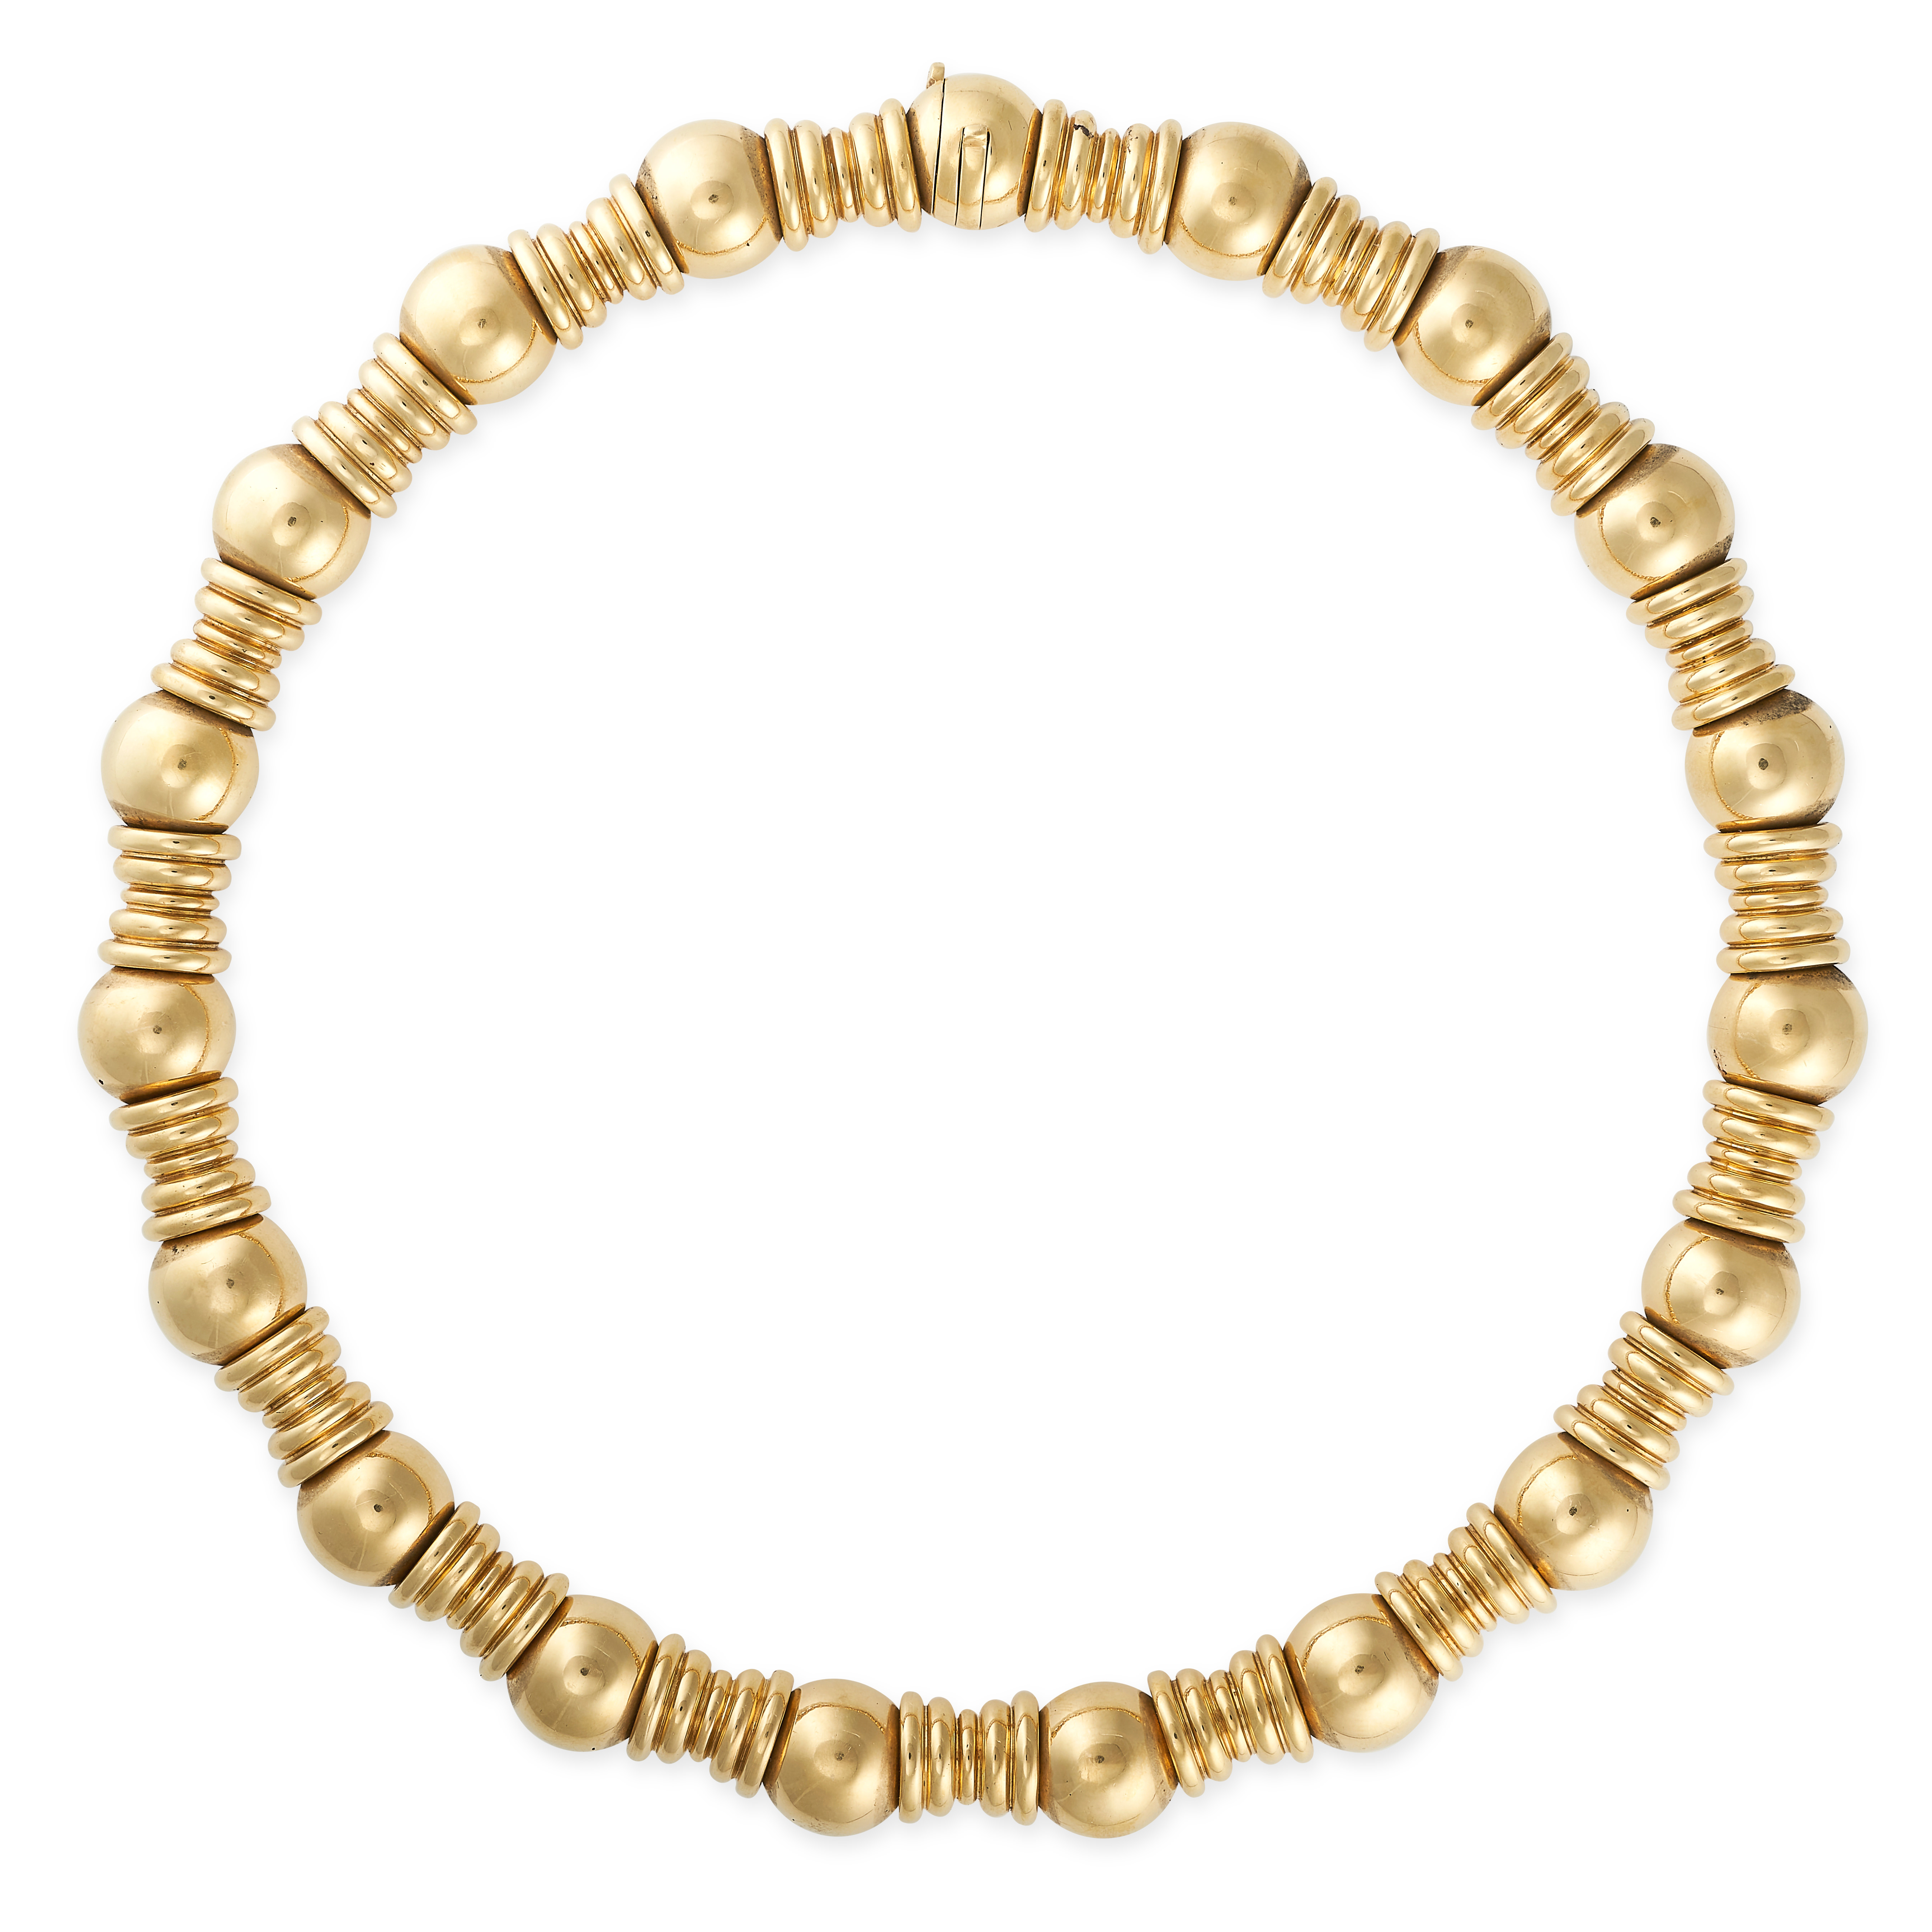 BOUCHERON, A VINTAGE GOLD COLLAR NECKLACE  Series of alternating spherical and fluted beads Signed